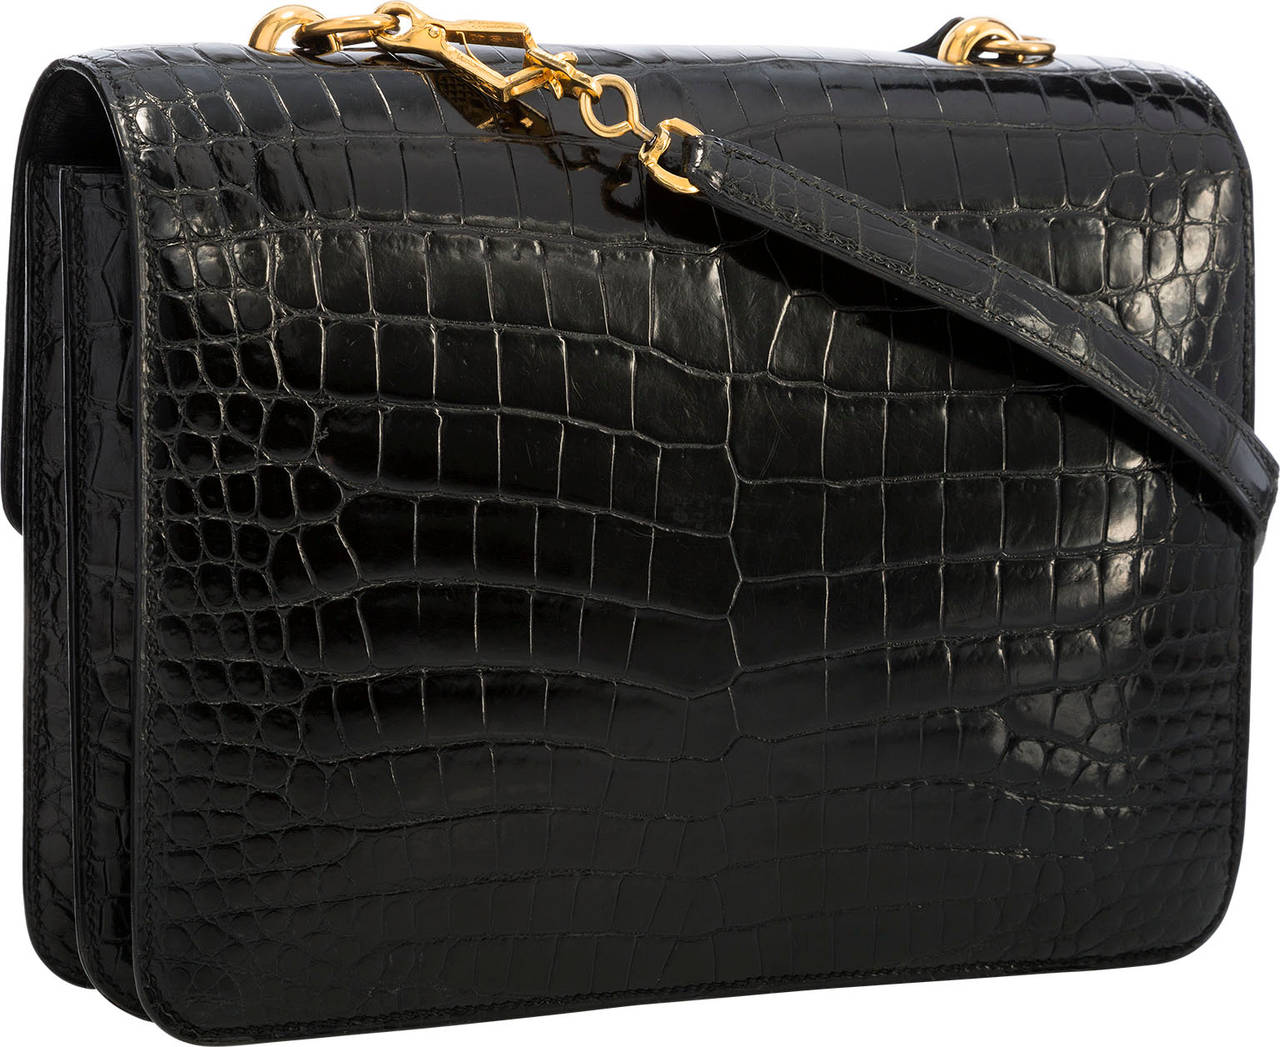 This timeless shoulder bag is sure to be a favorite of any Hermès enthusiast. Done in Shiny Black Porosus Crocodile with Gold Hardware, this bag is classic, yet not often seen. It features a flap top with a tuck closure. The interior is done in